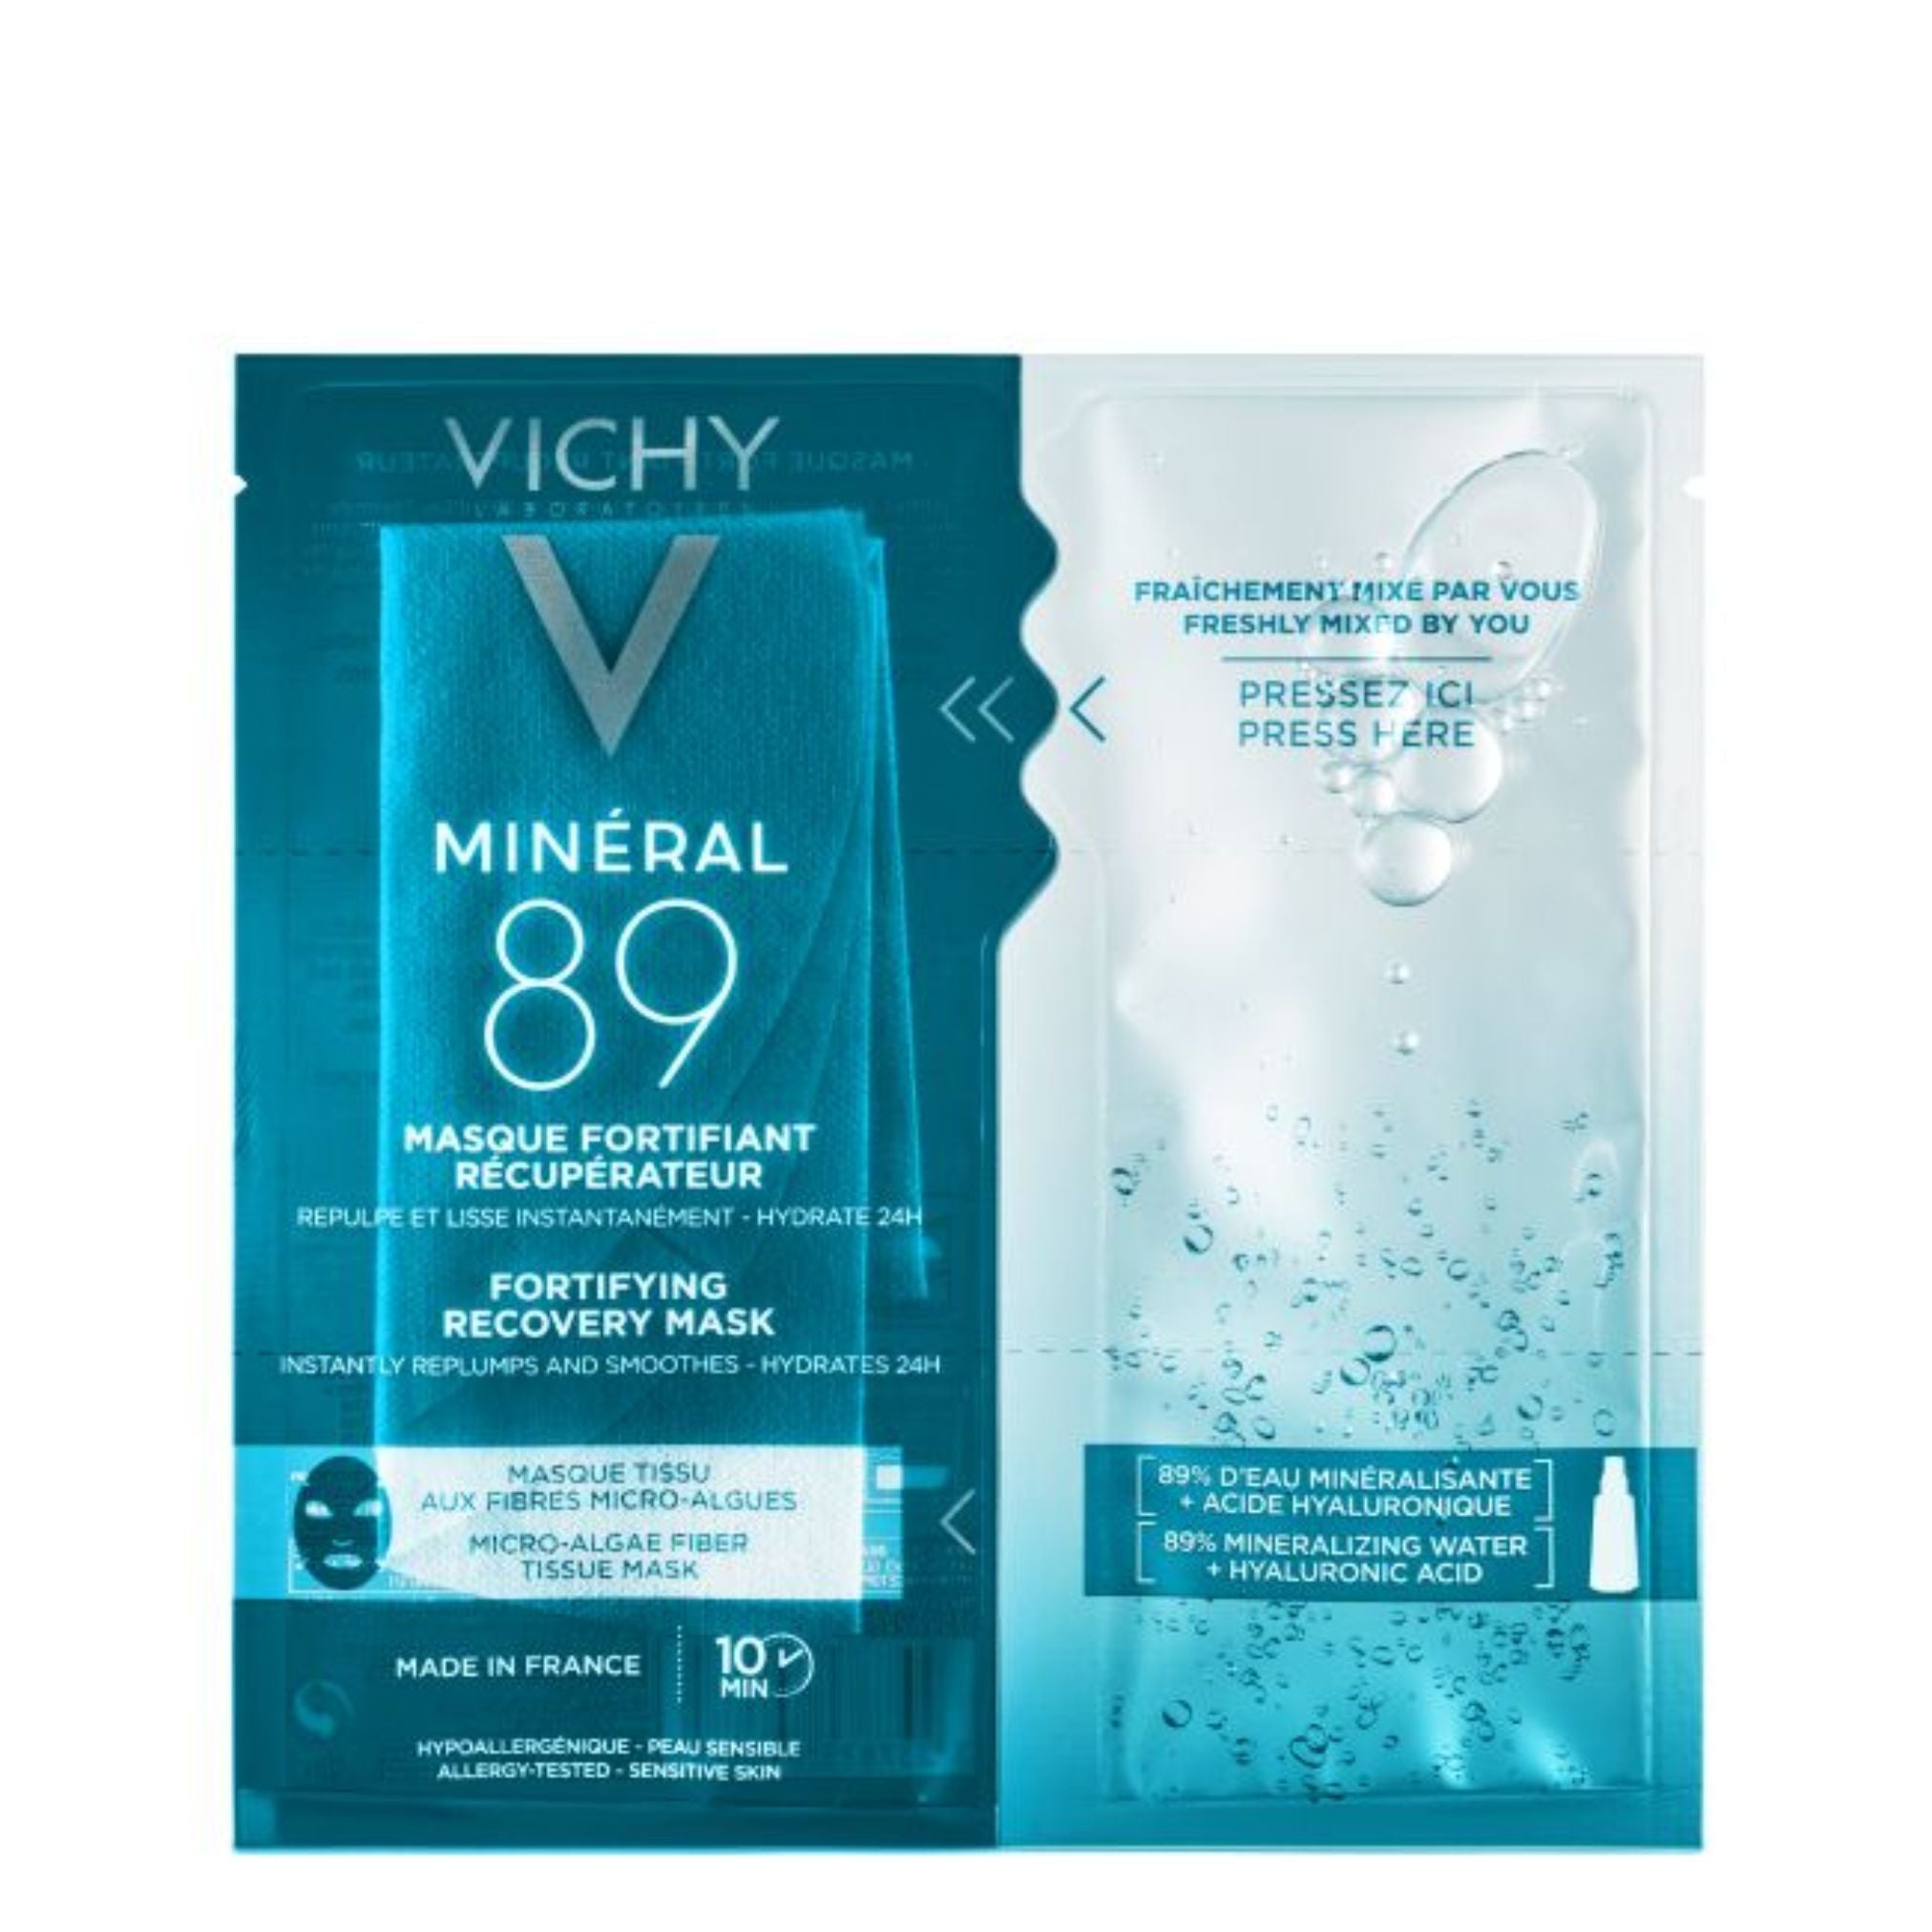 Vichy Minéral 89 Fortifying Recovery Mask 29g